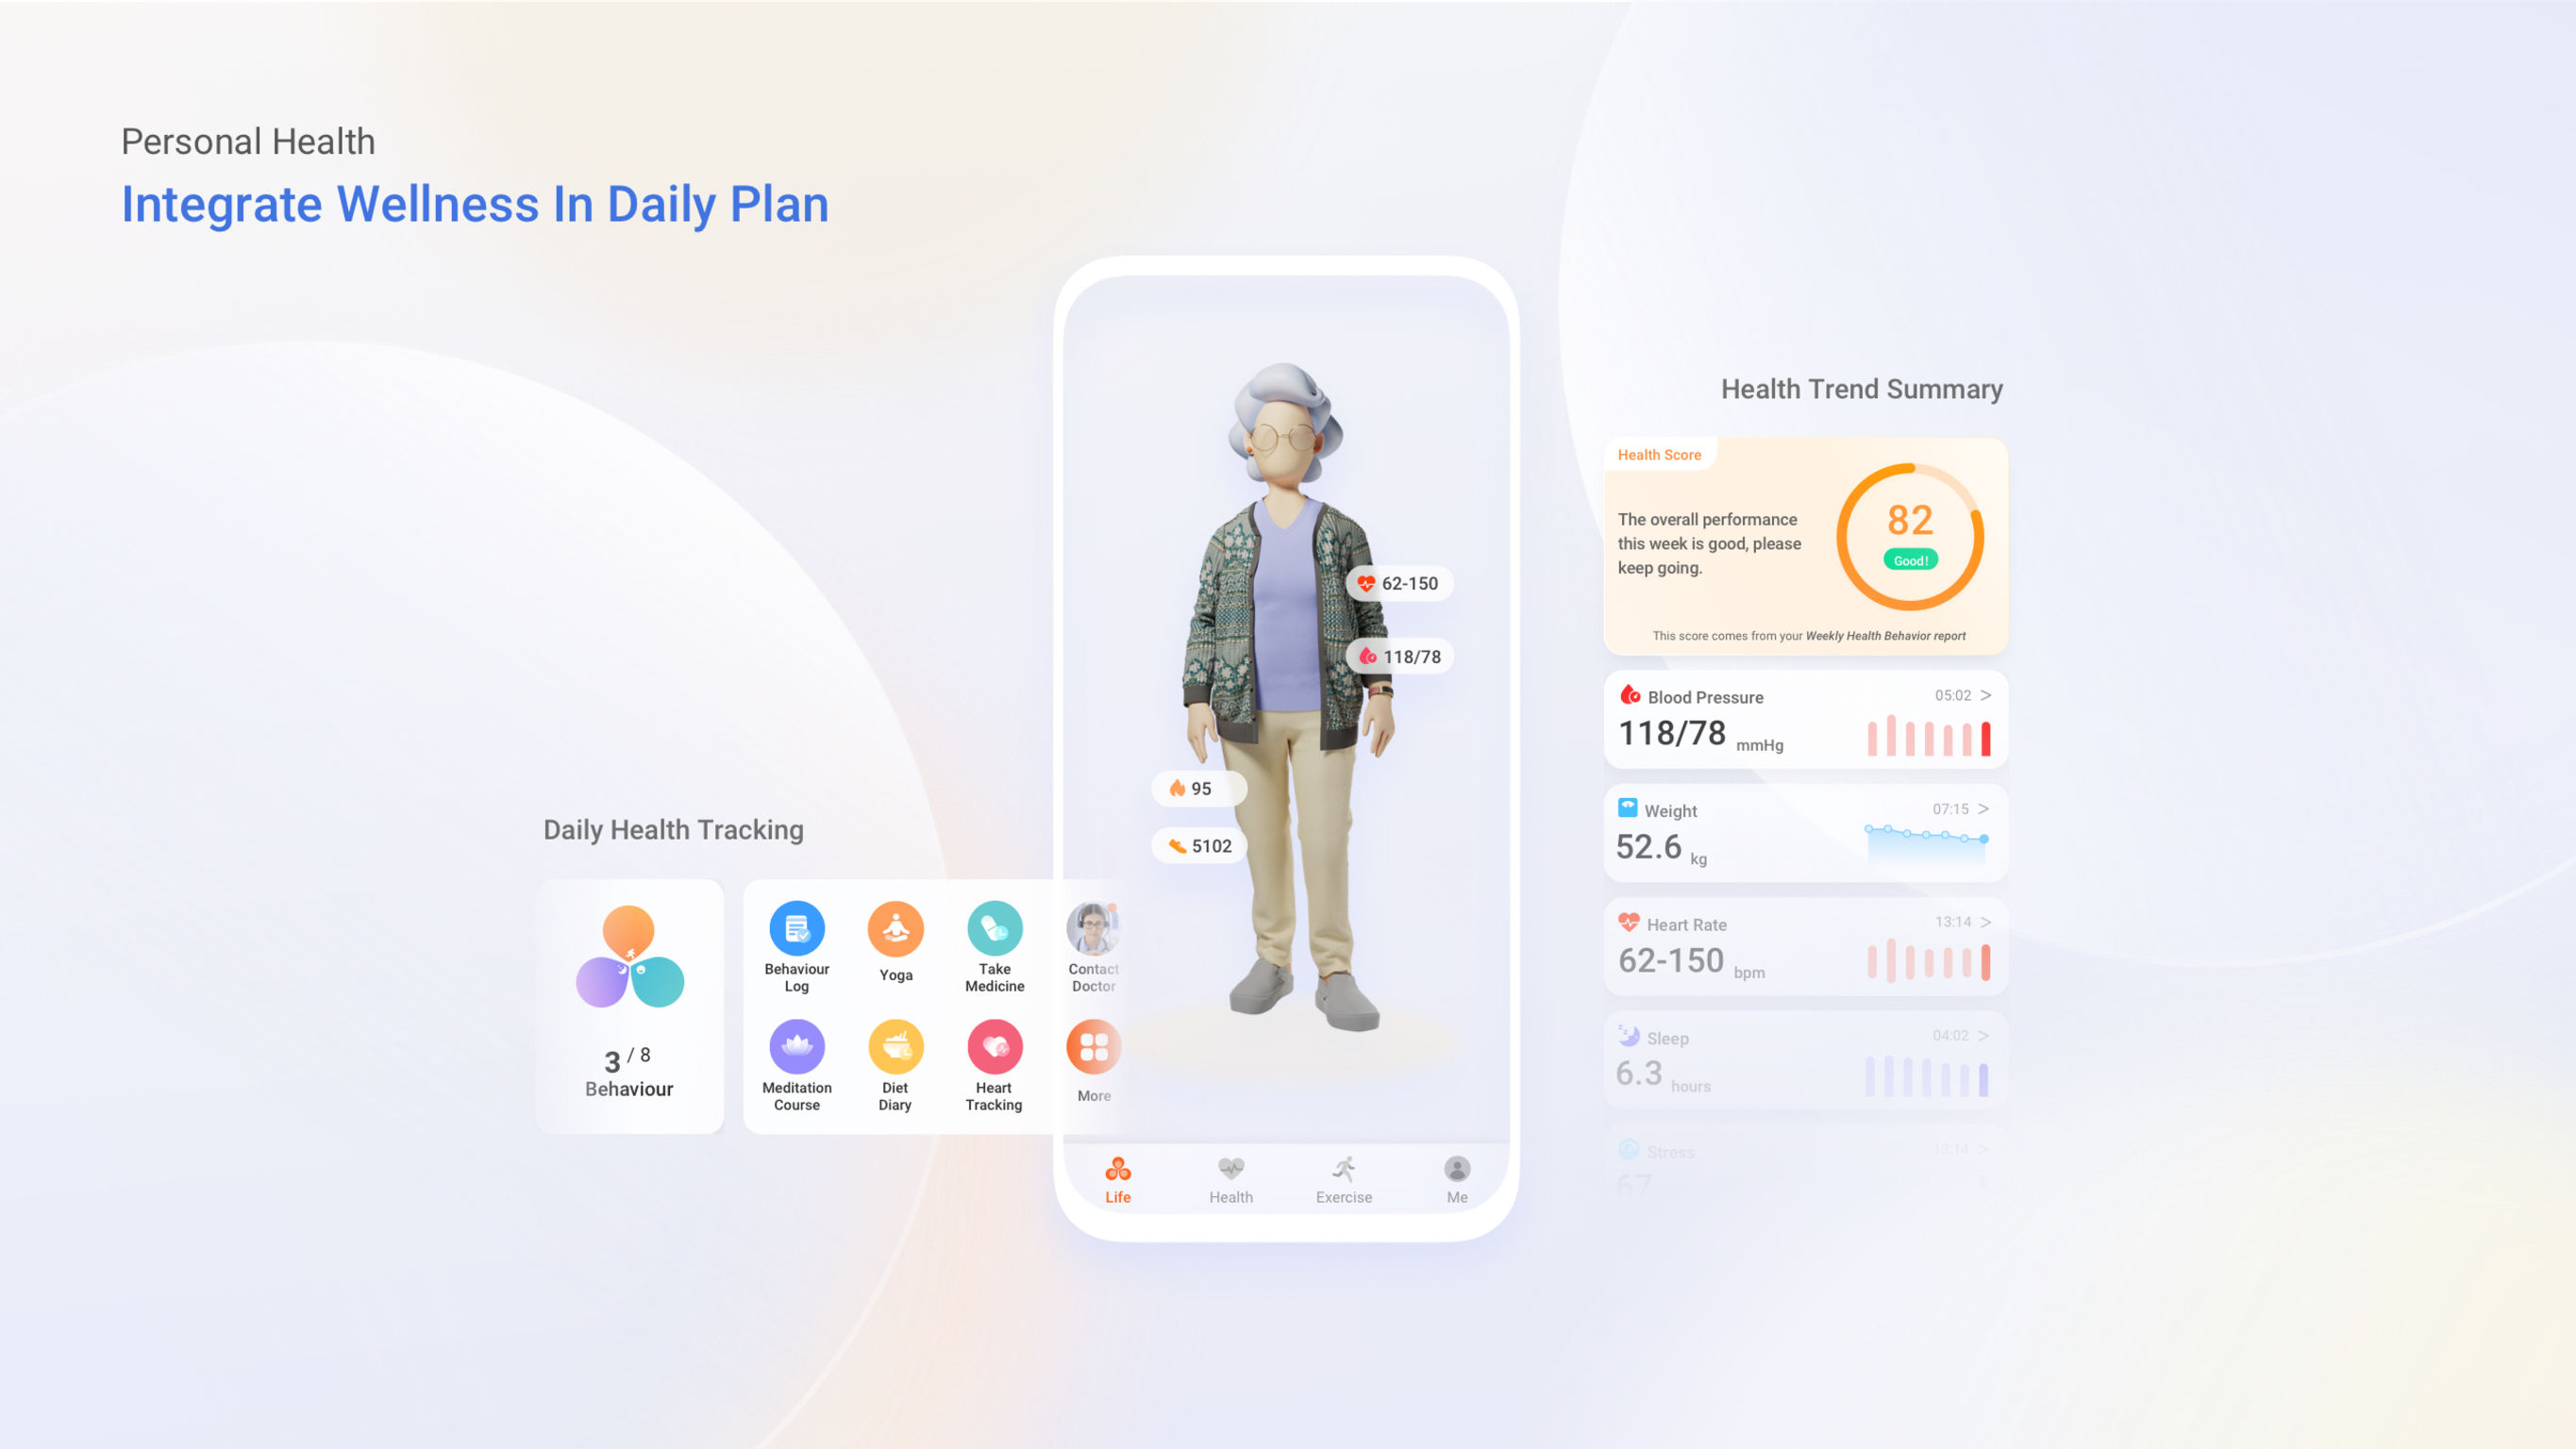 HUAWEI - HOME Health Management